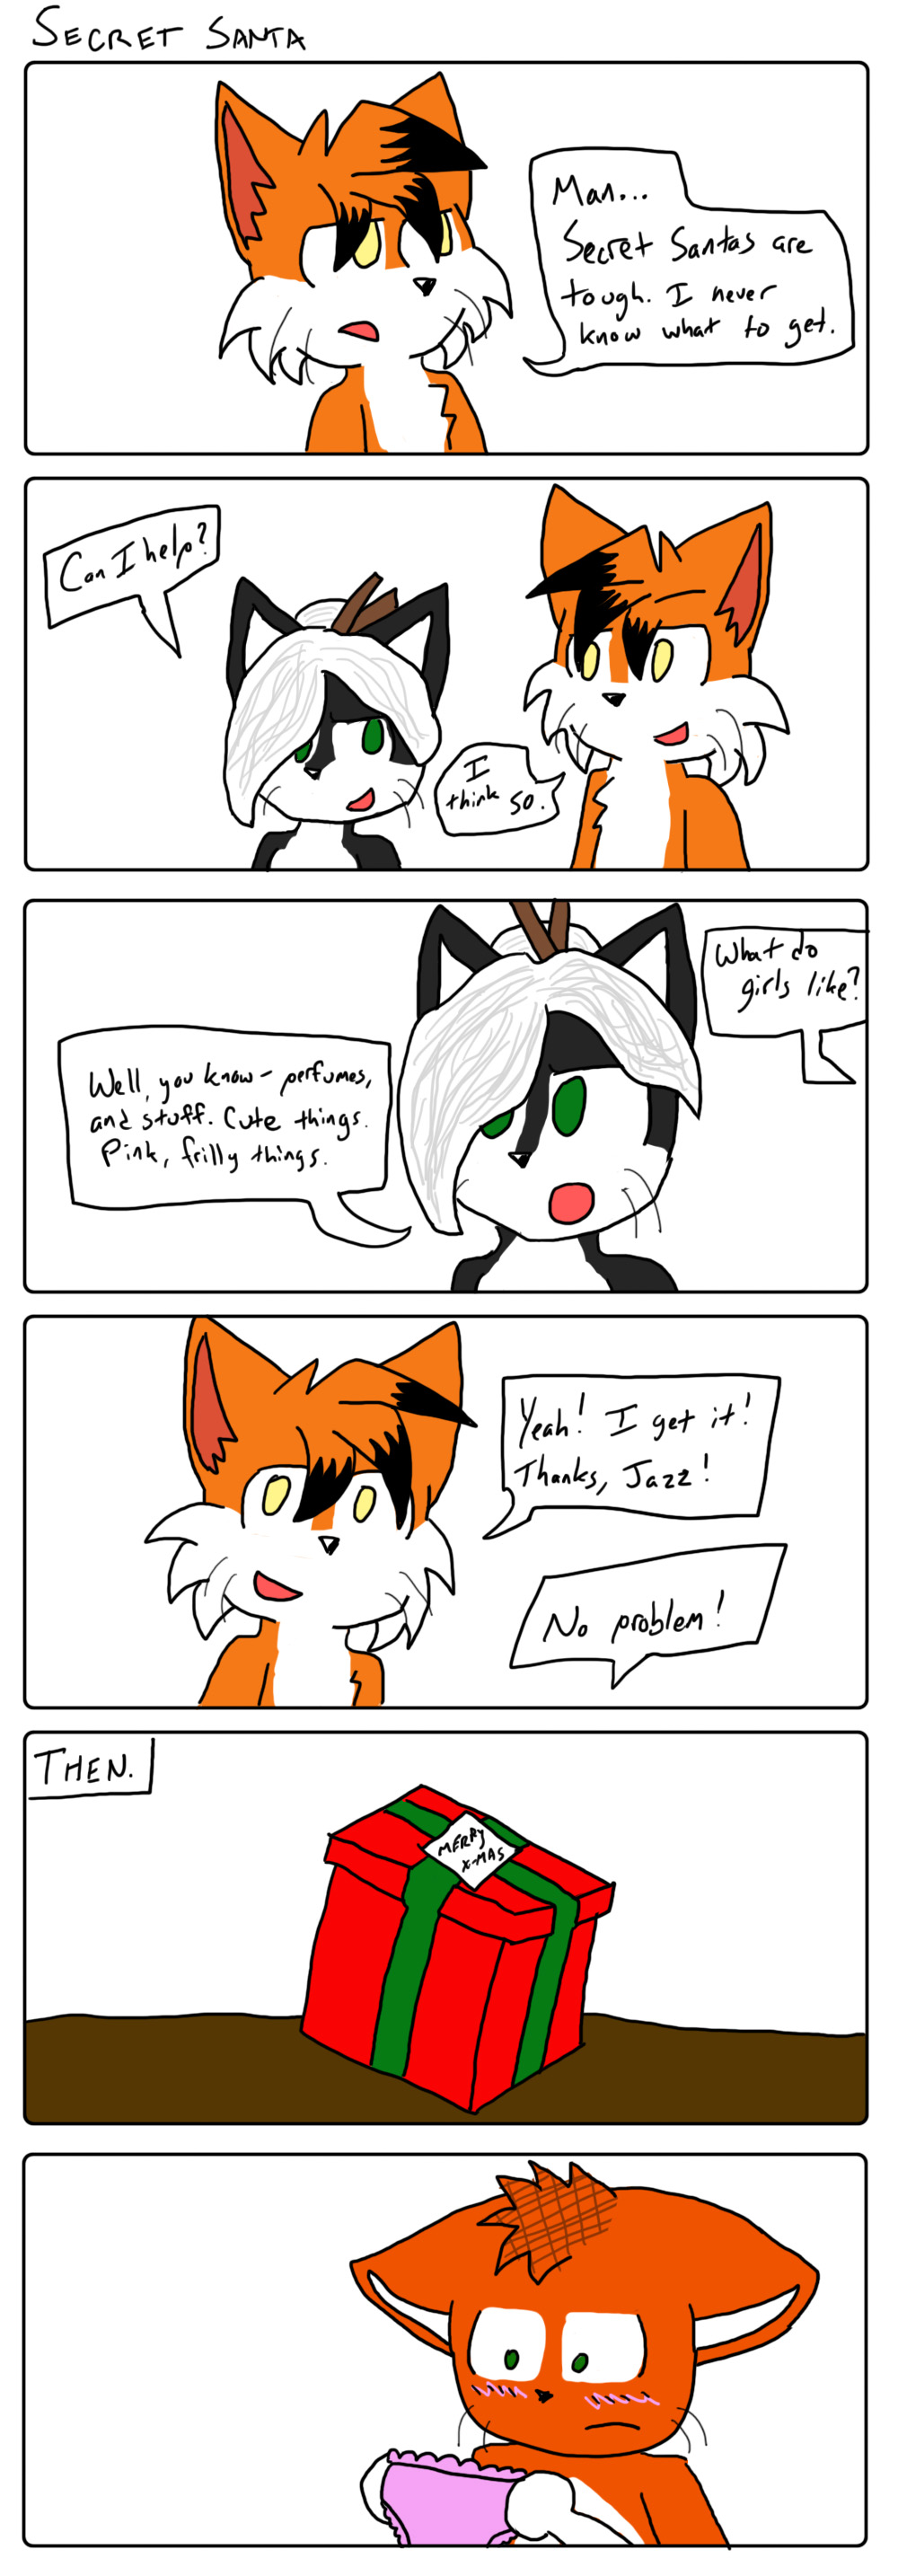 Candybooru image #2363, tagged with Abbey Jasmine Paulo SpaceMouse_(Artist) comic